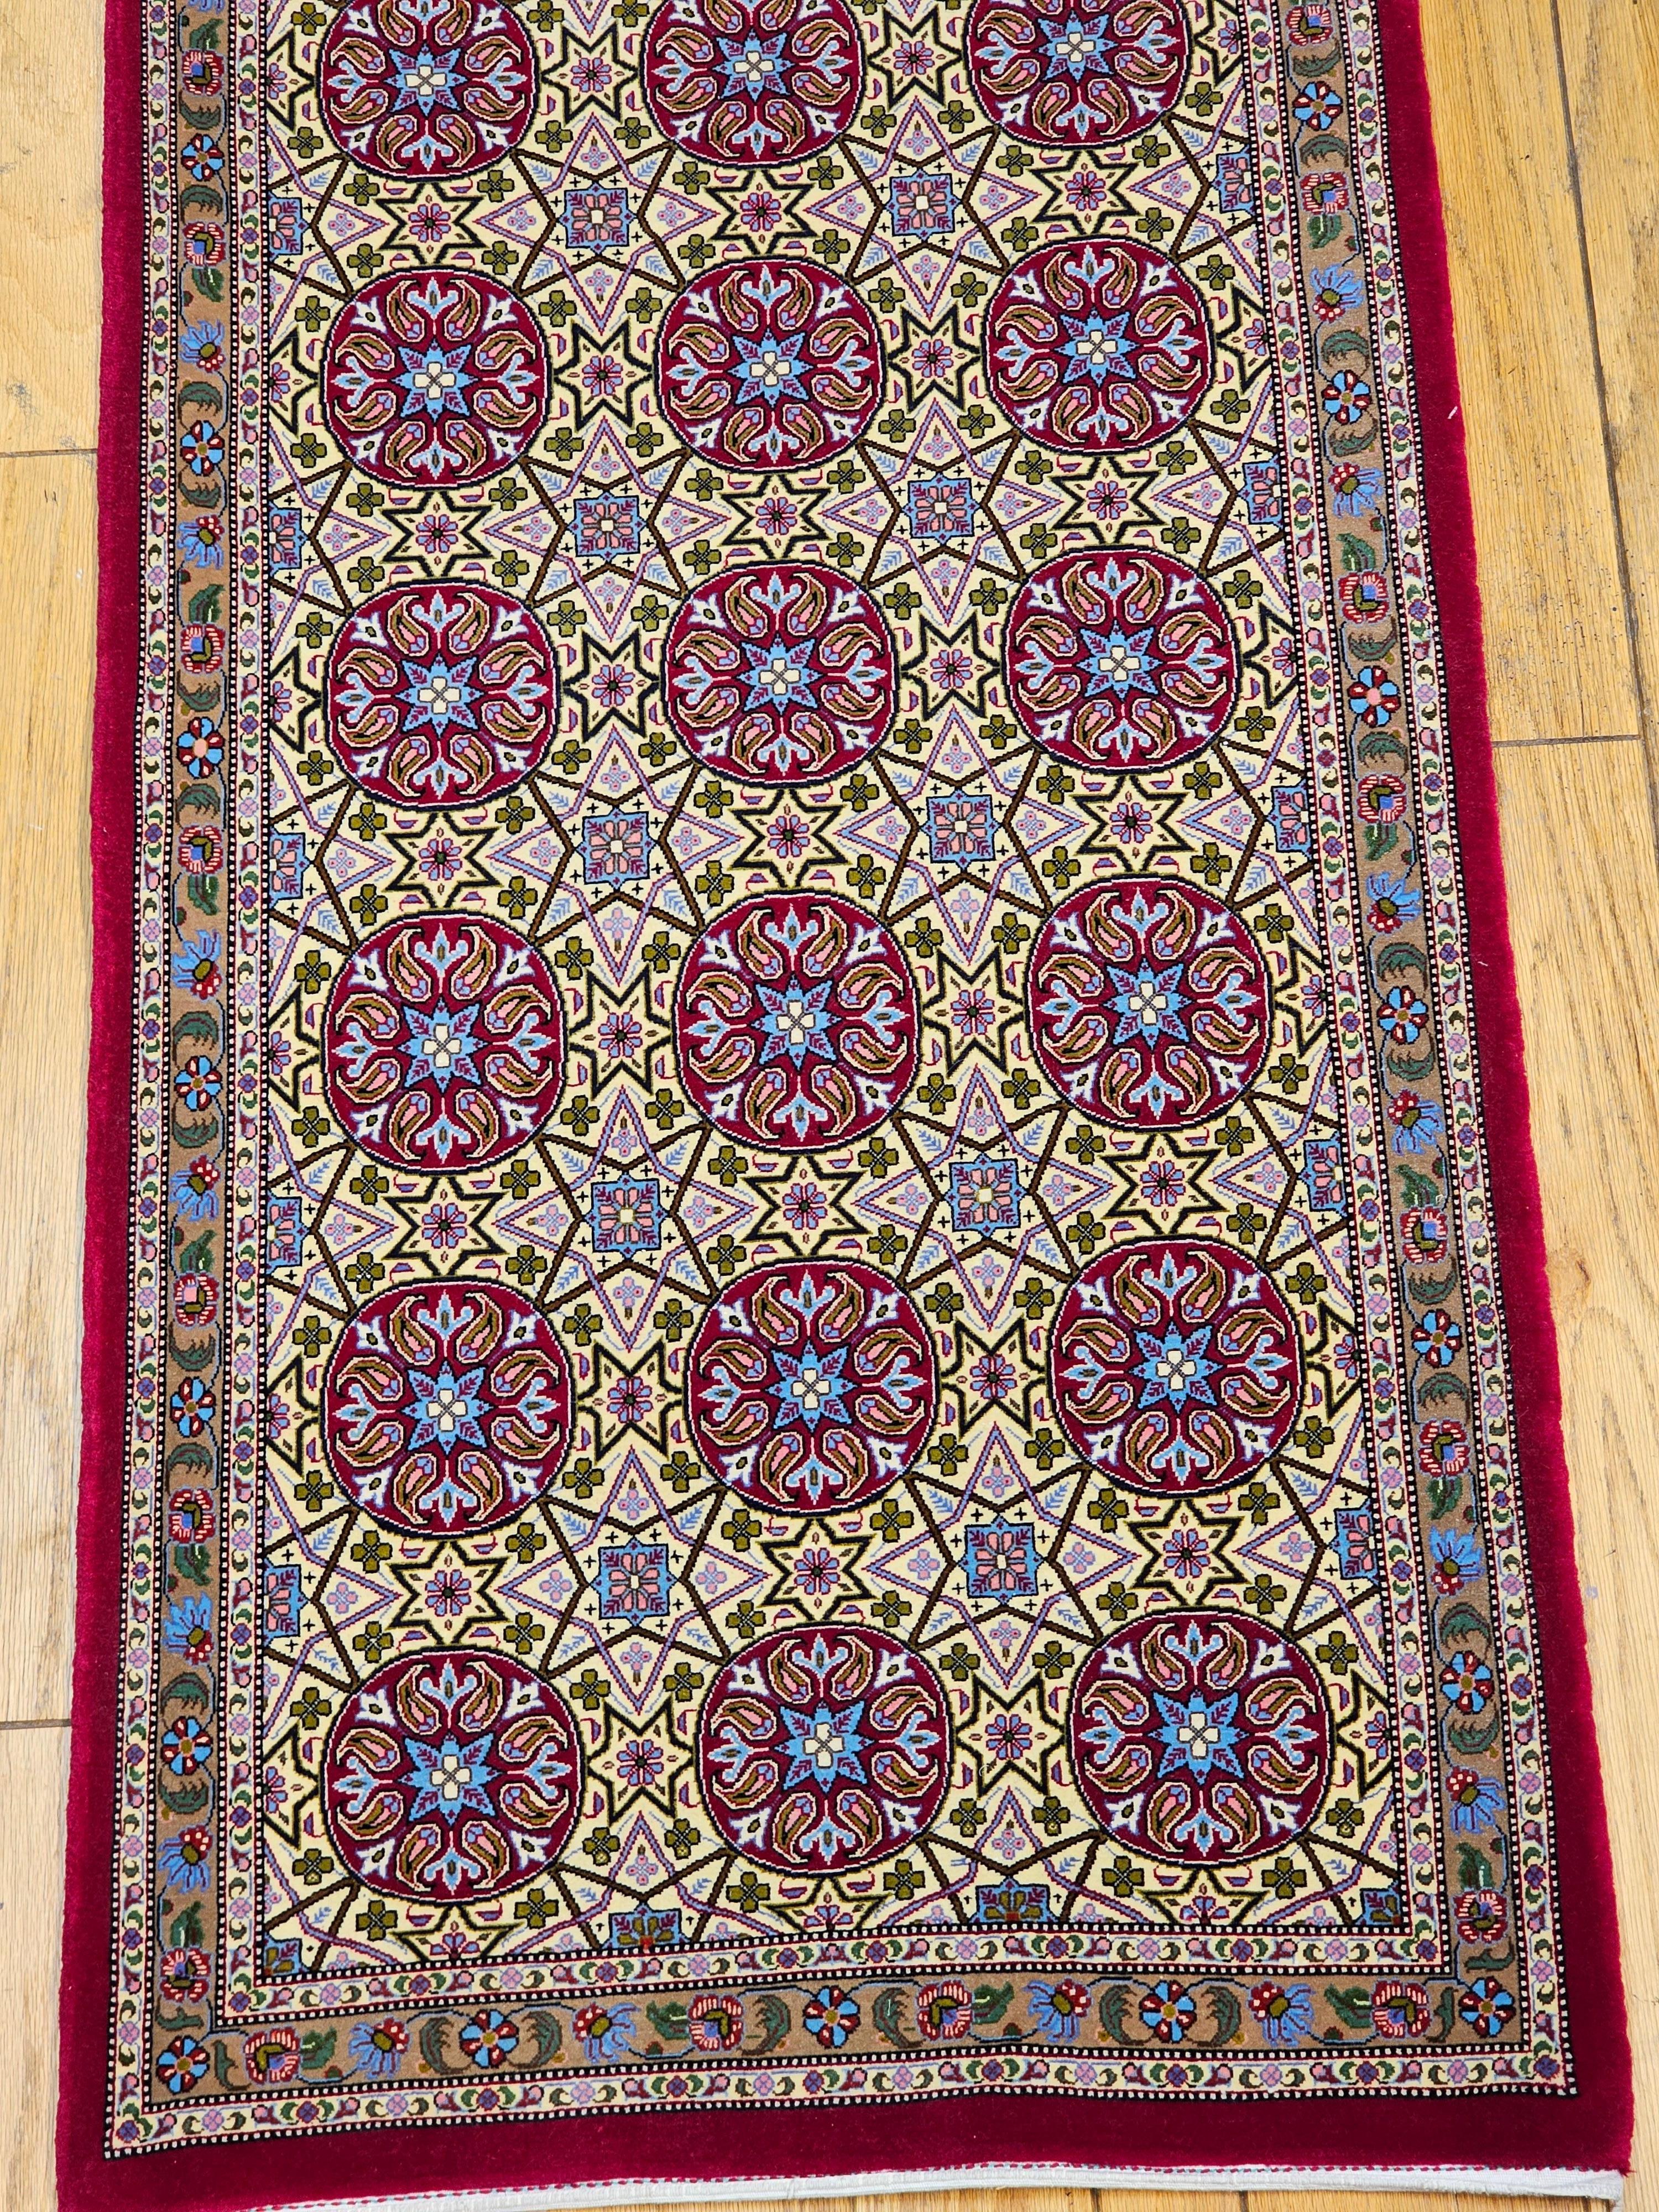  Beautiful Persian Qum runner in a rare geometric design.  The Qum runner design includes circles that have the paisley design in them in a light yellow field framed in a narrow border with flower designs in cream, red, blue, and green.  Qum rugs